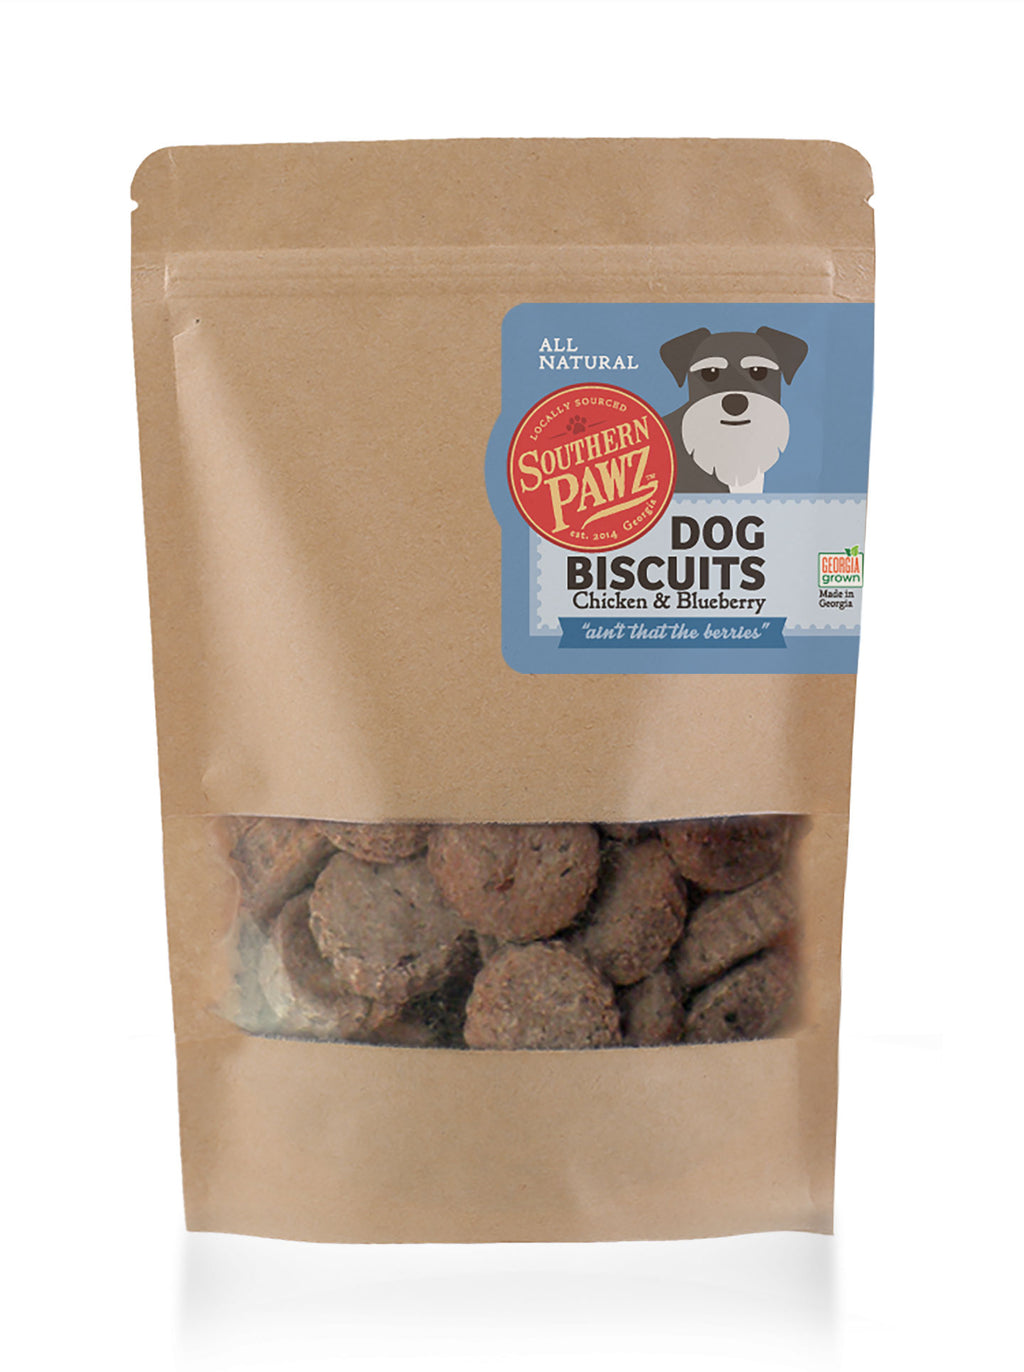 Dog Biscuits - Chicken and Blueberry 6 oz. Resealable Bag Cookie Size Bites